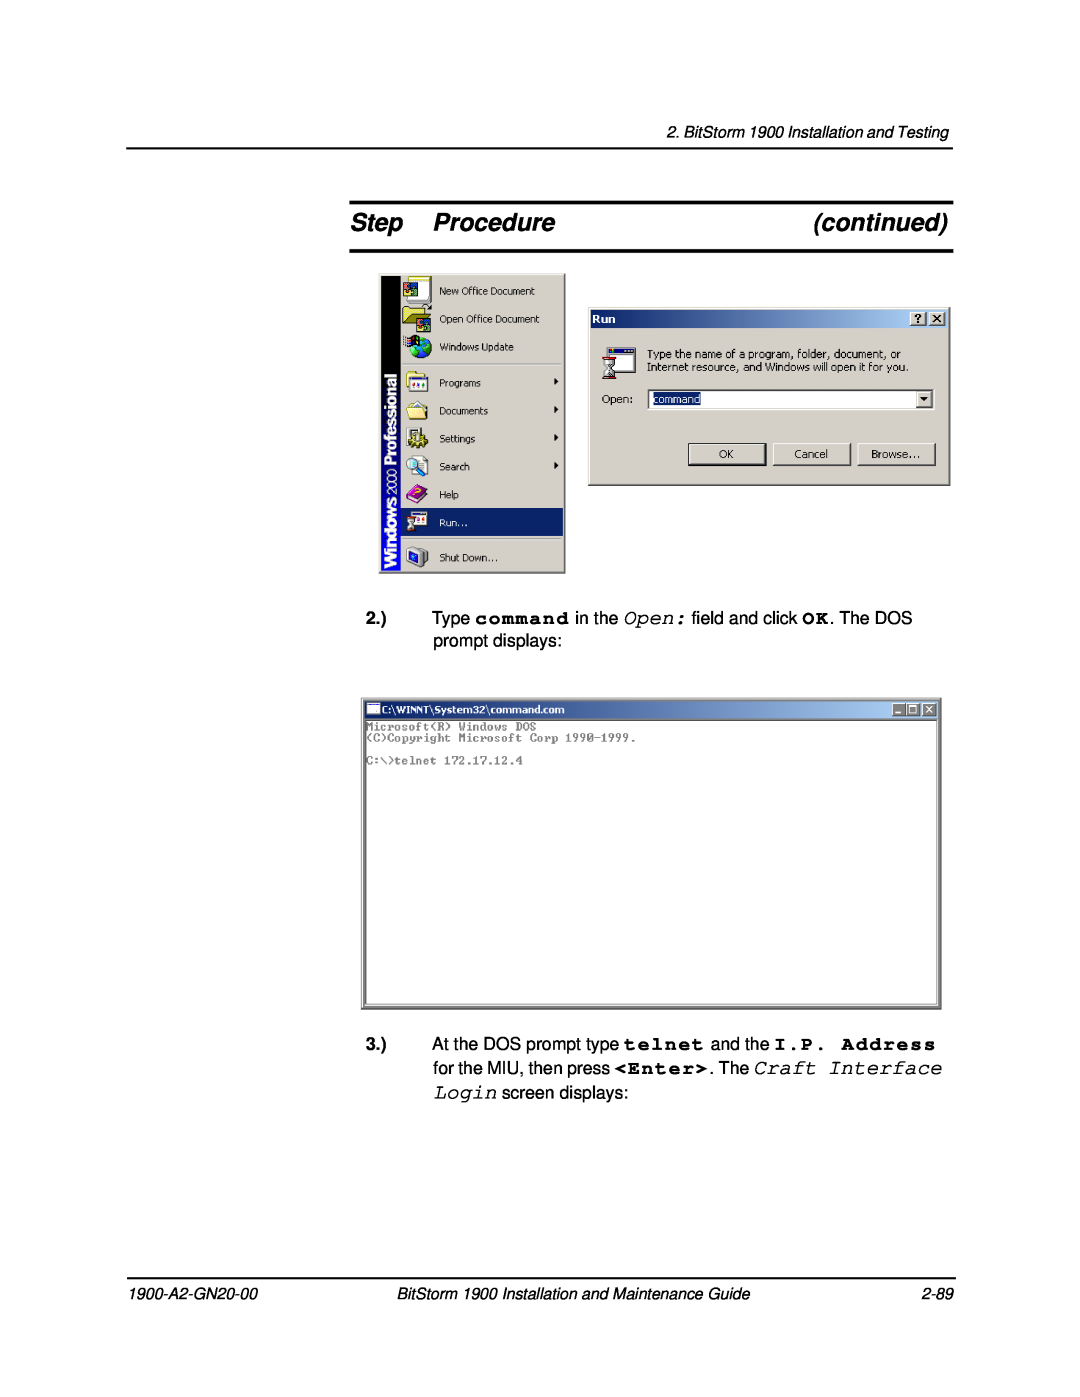 Paradyne 1900 manual Step Procedure, continued, Type command in the Open field and click OK. The DOS prompt displays 